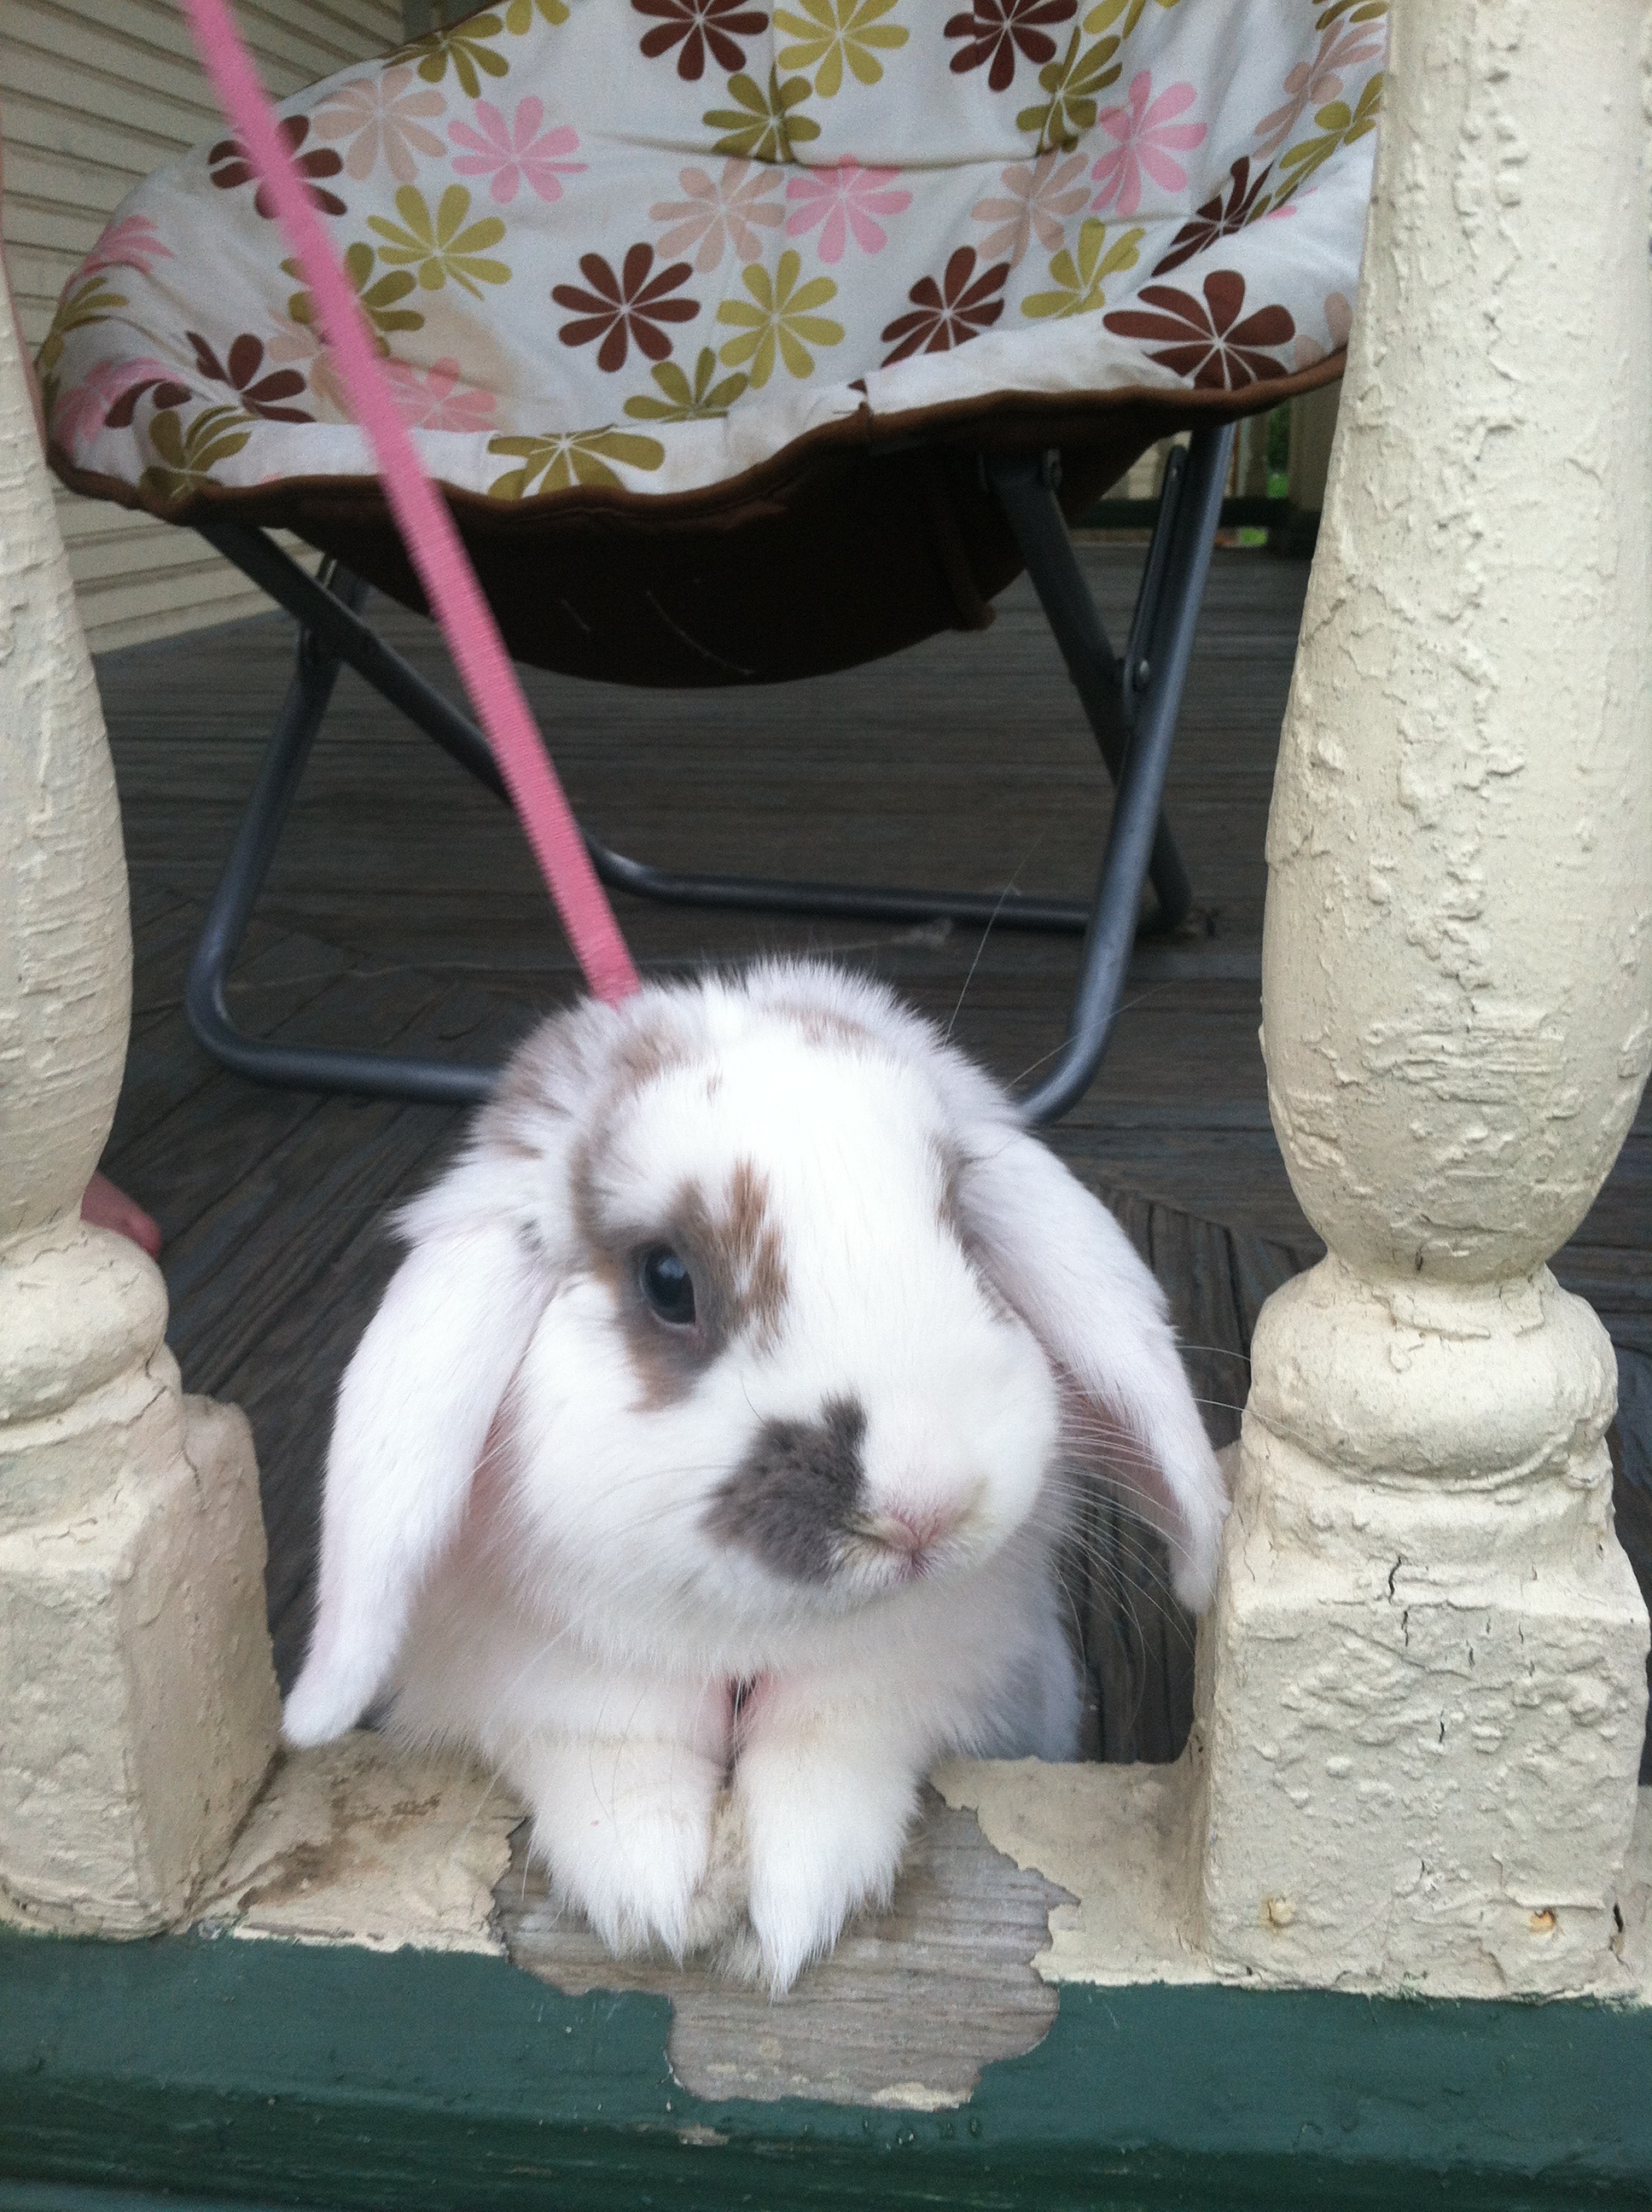 Bunny Looks Out at the Big, Wide World from Her Porch